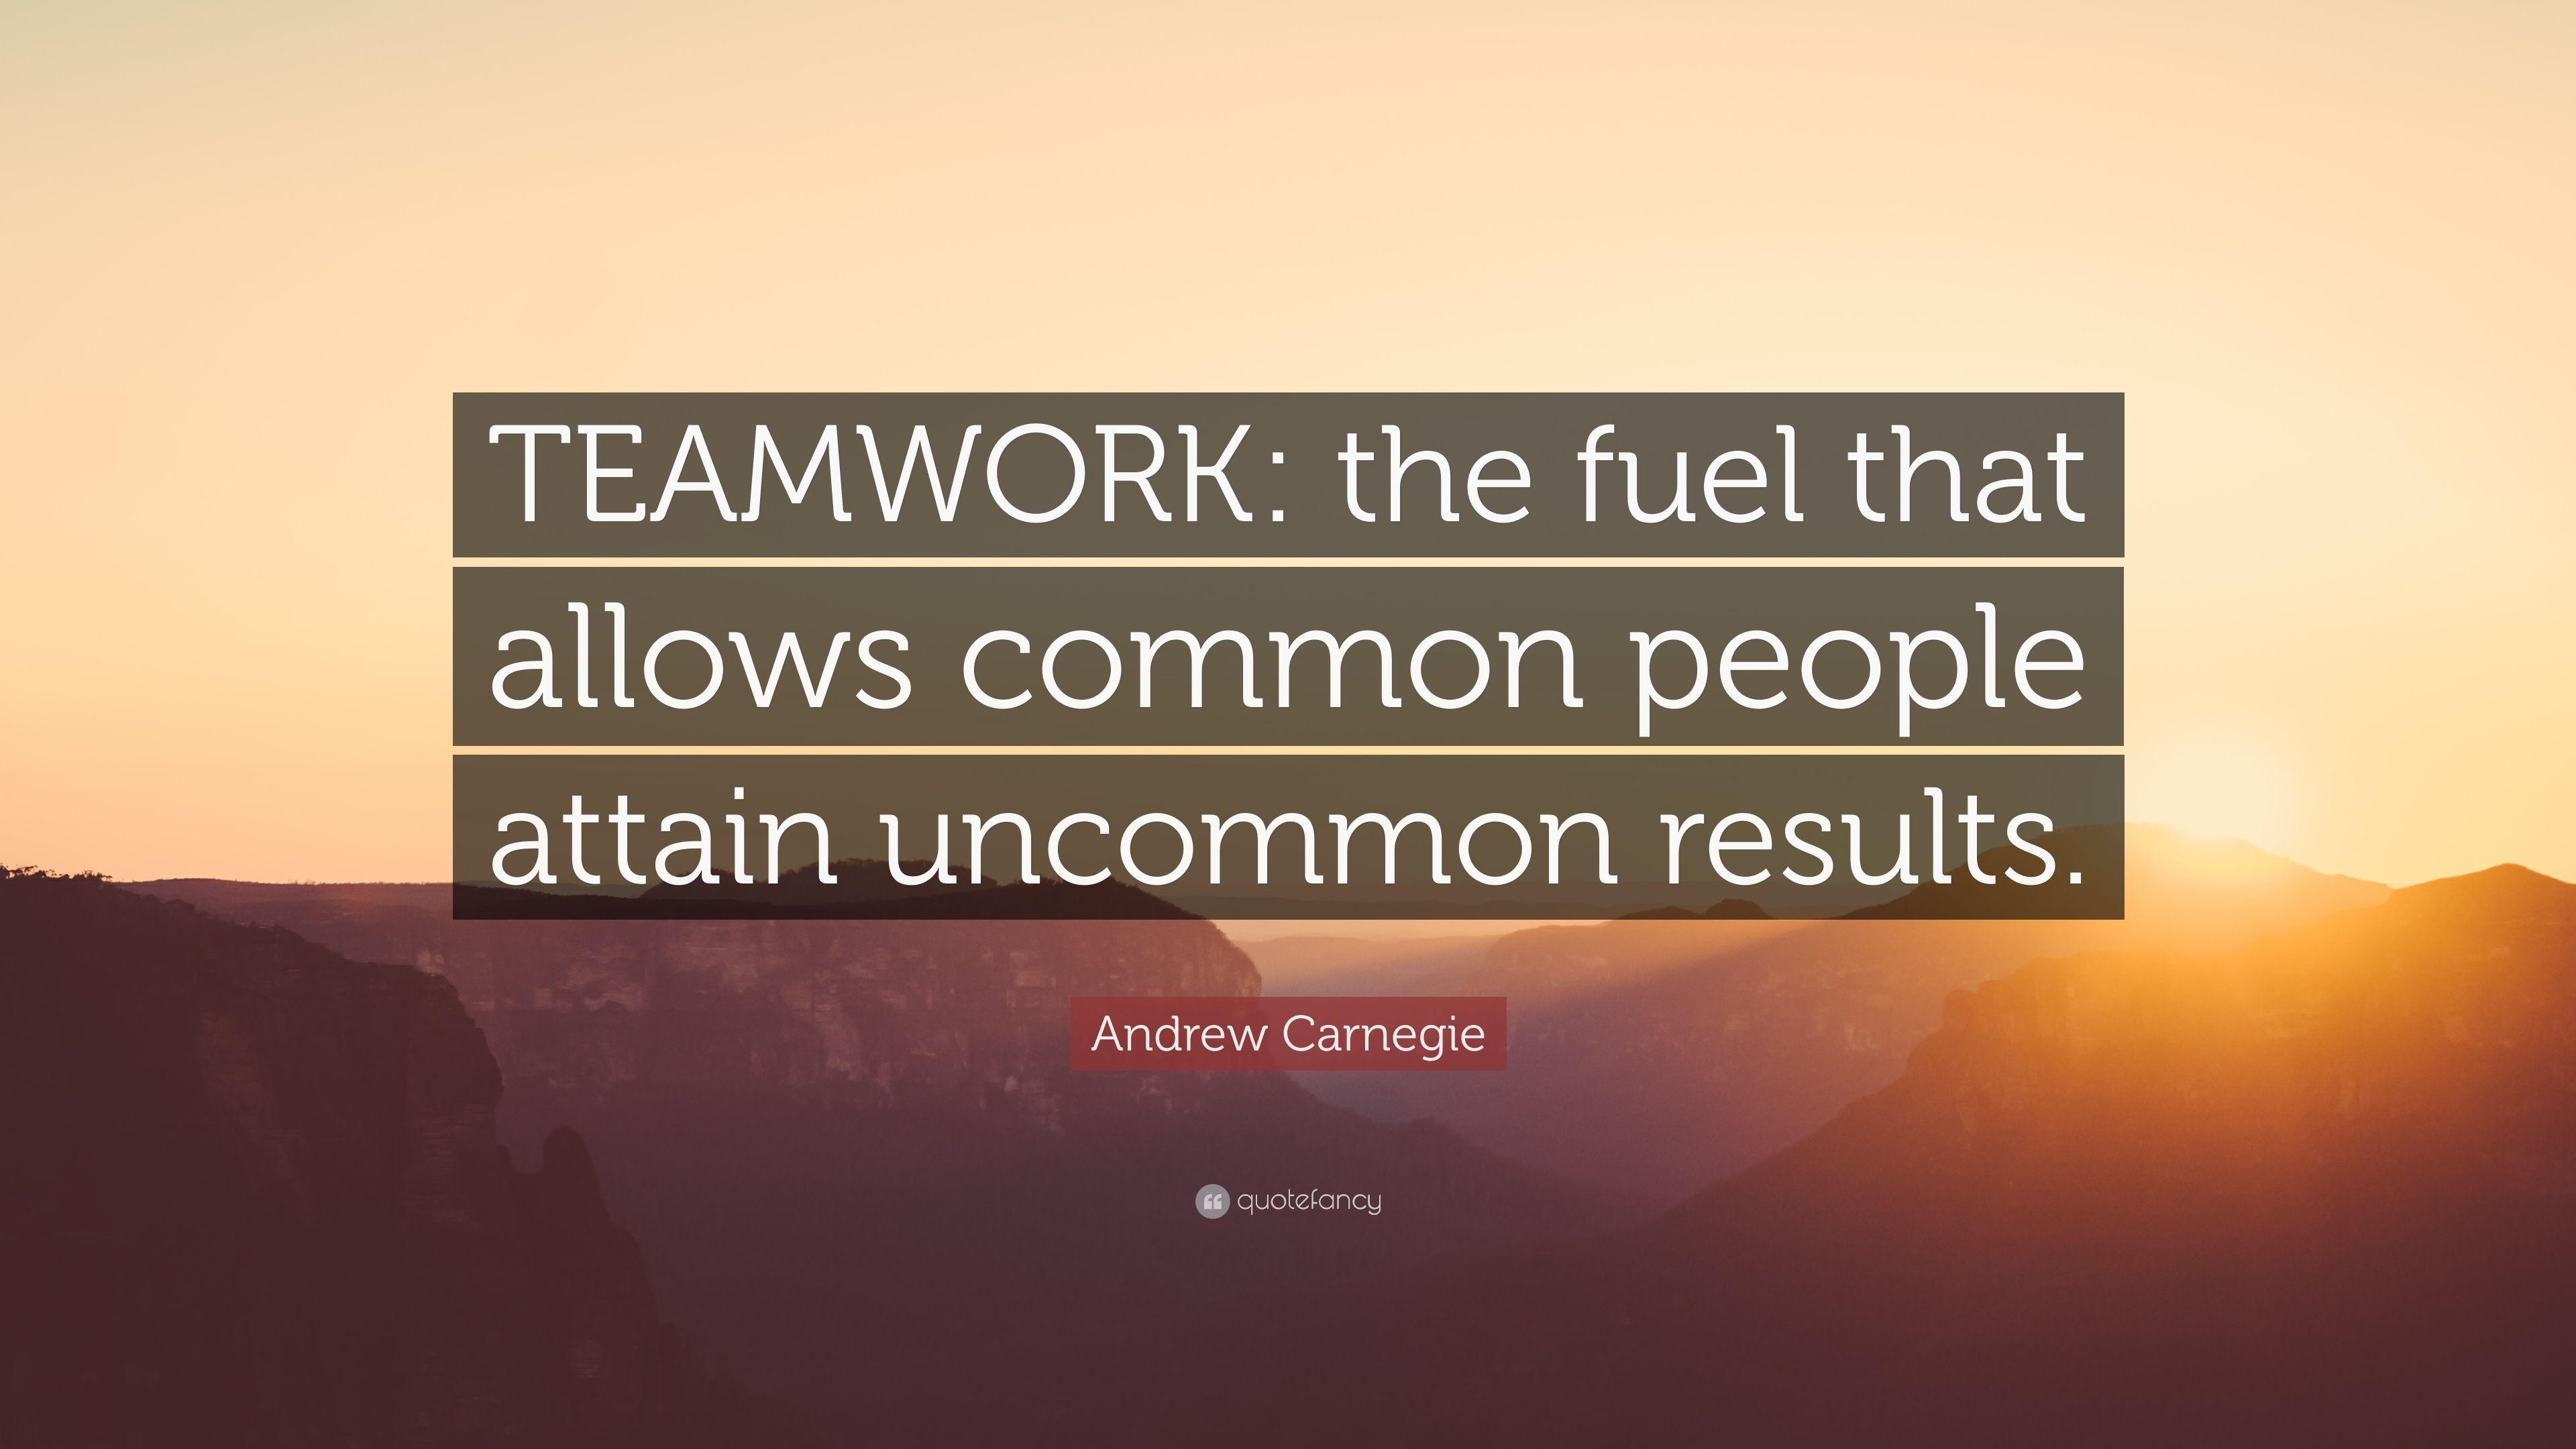 Andrew Carnegie Quote: “TEAMWORK: the fuel that allows common